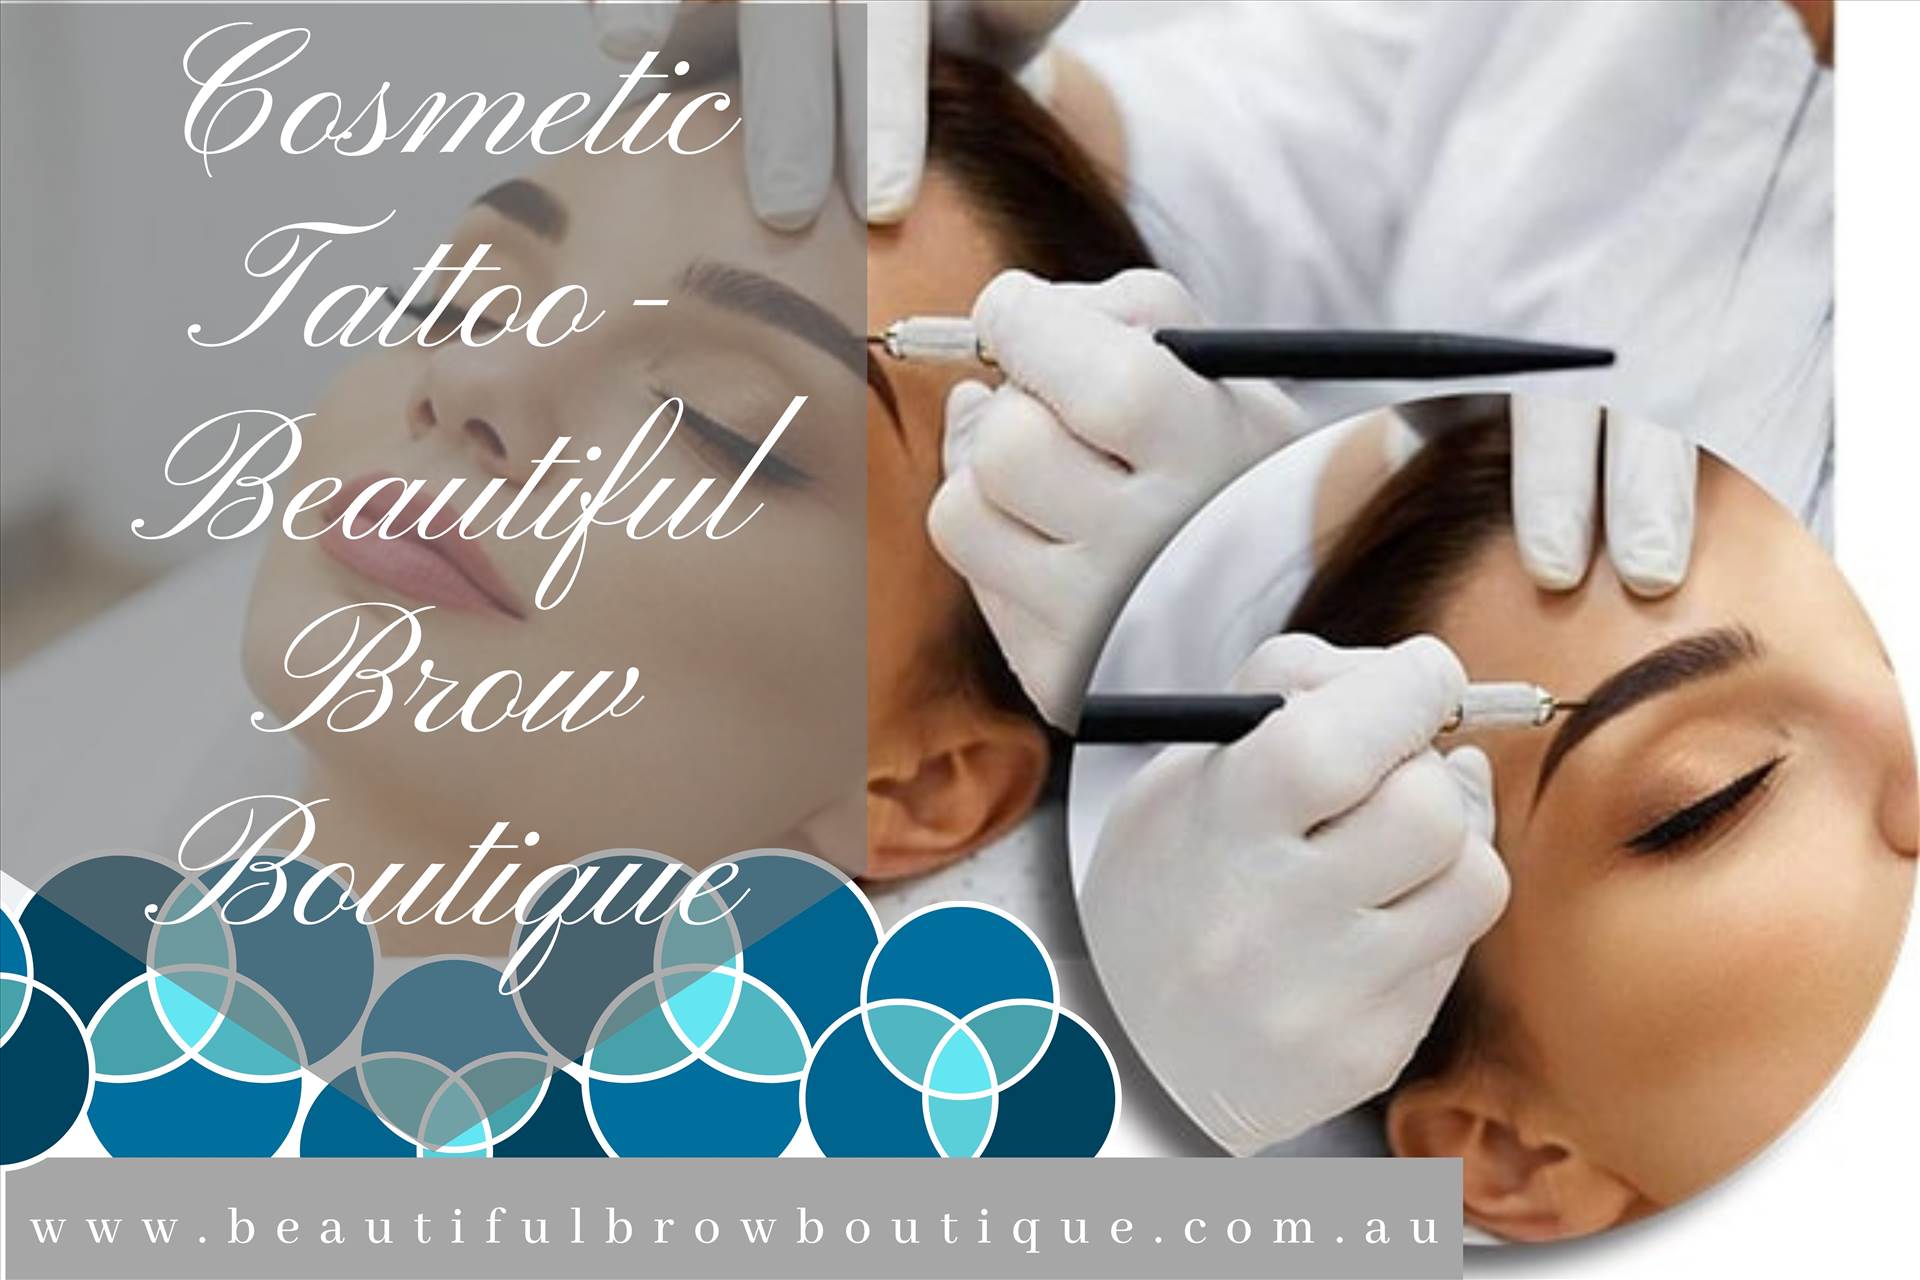 Cosmetic Tattoo- Beautiful Brow Boutique.jpg  by beautifulbrowboutique